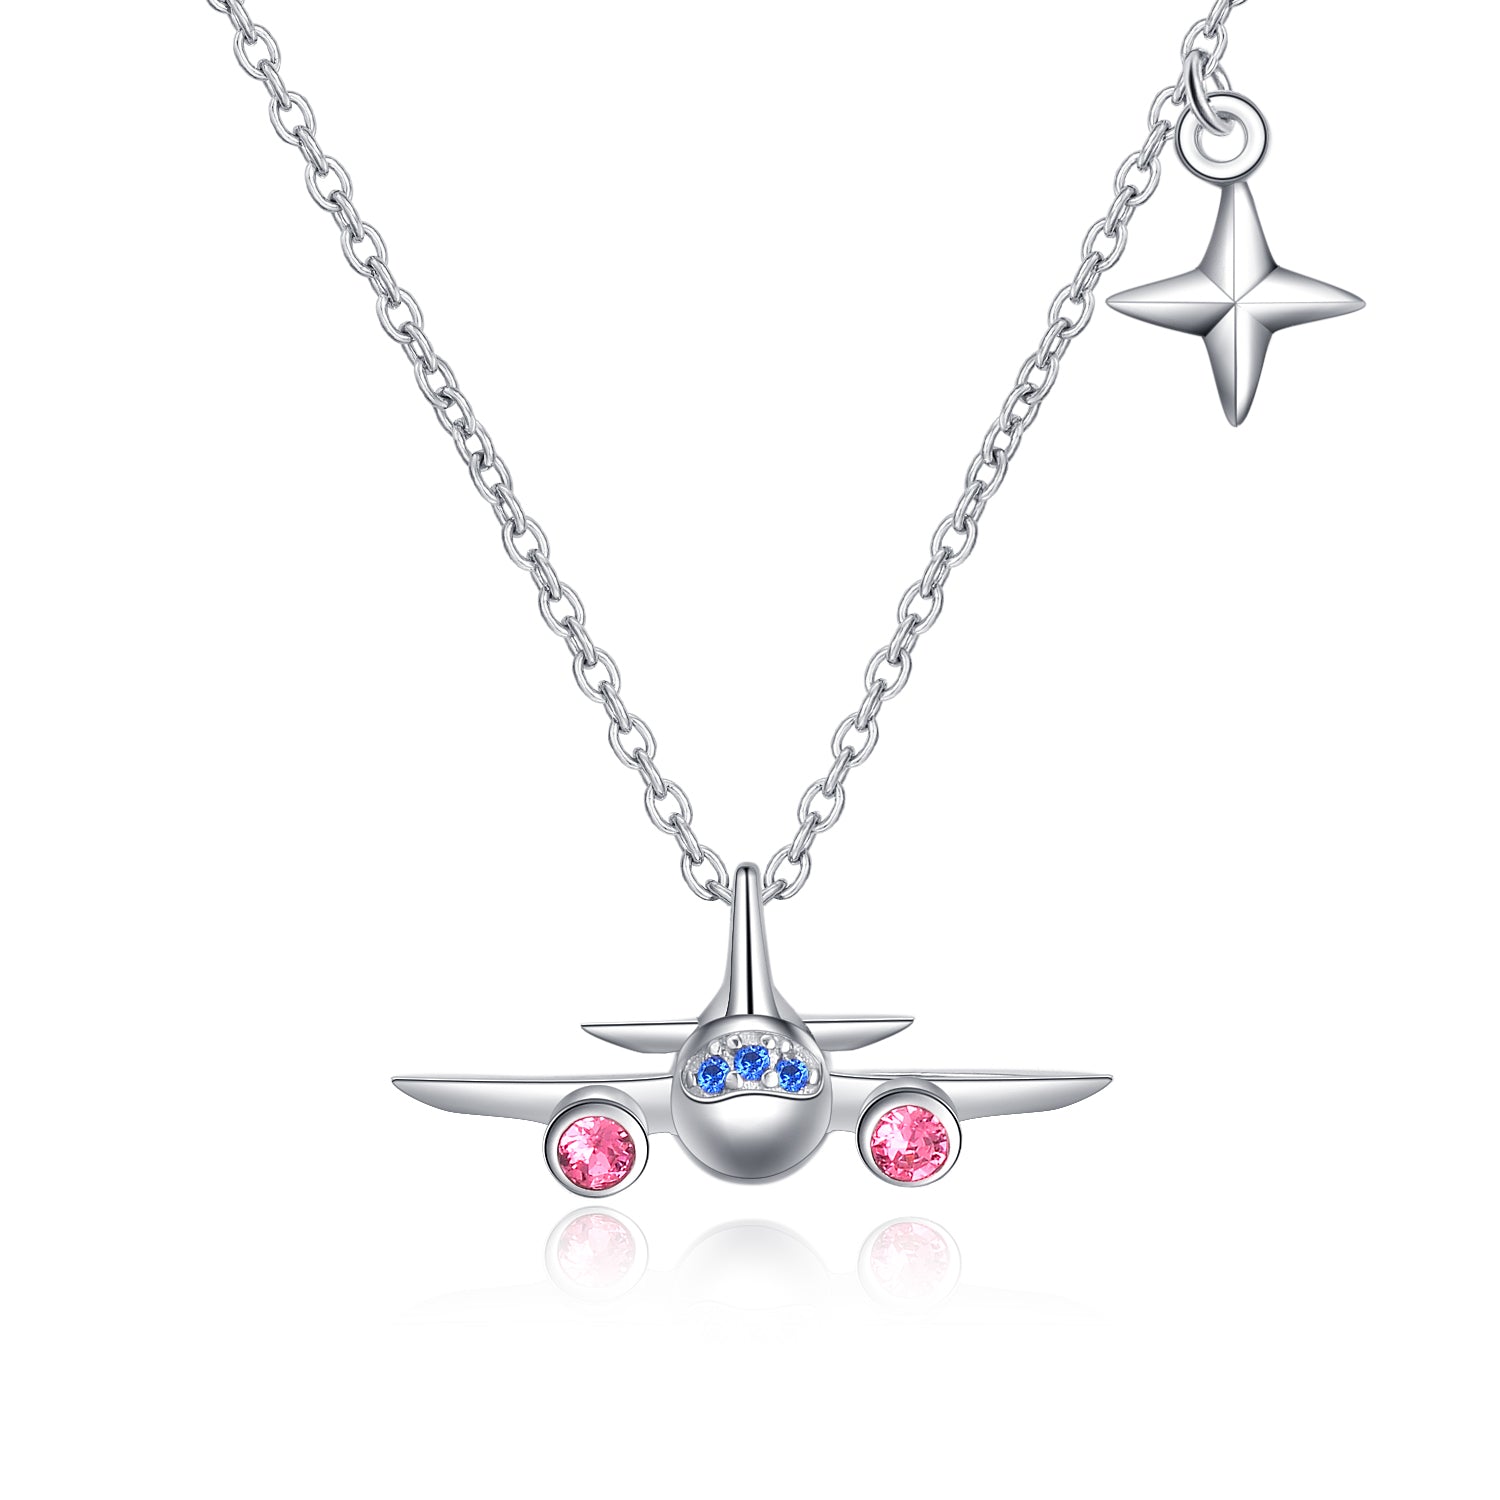 Wholesale Product Jewelry Plane shape Latest Children Necklace Designs for women